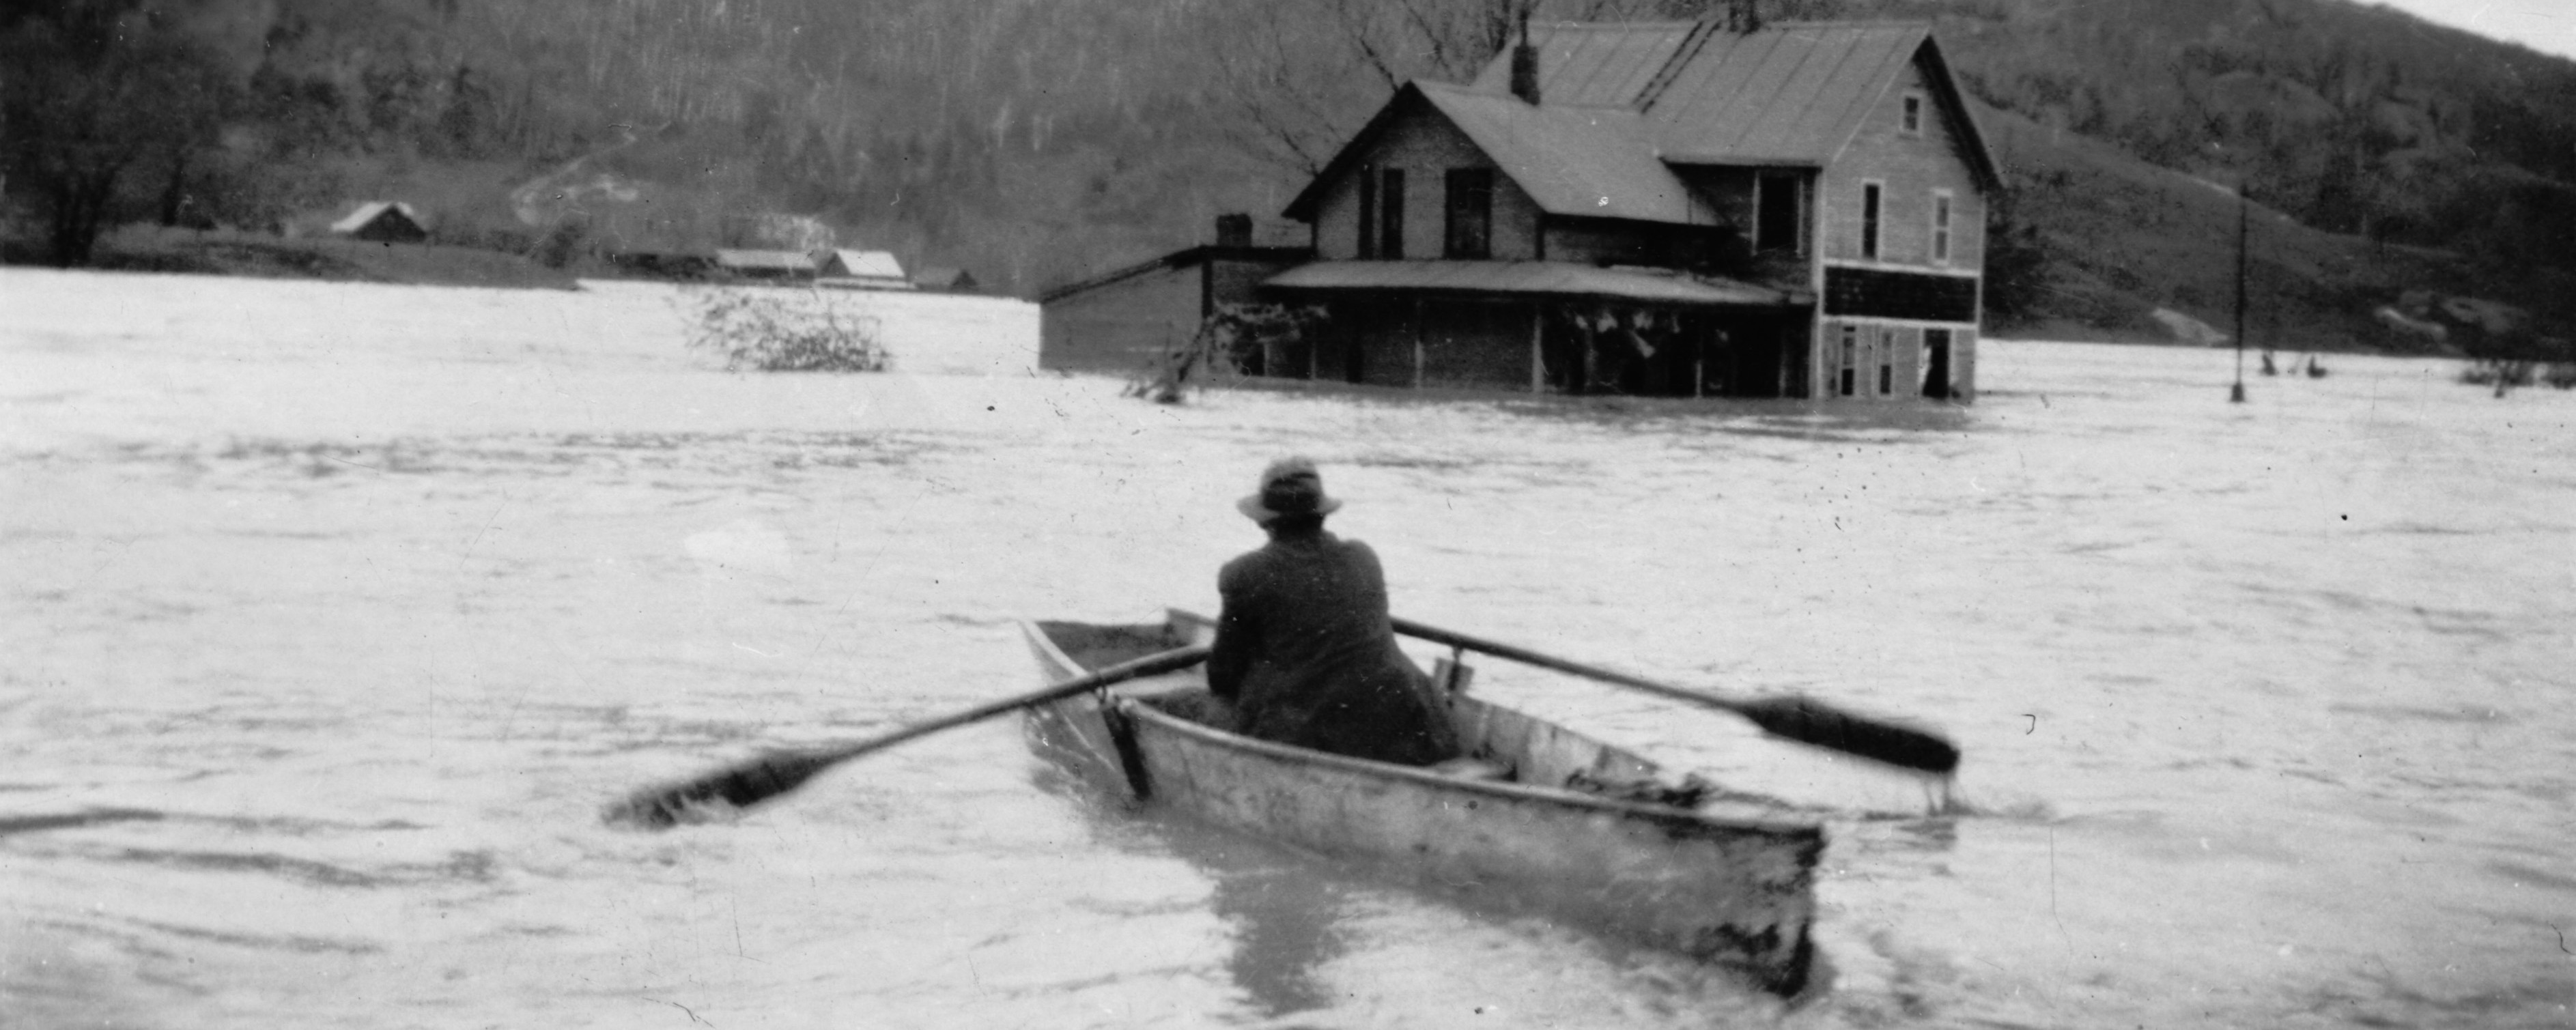 man in boat during flood